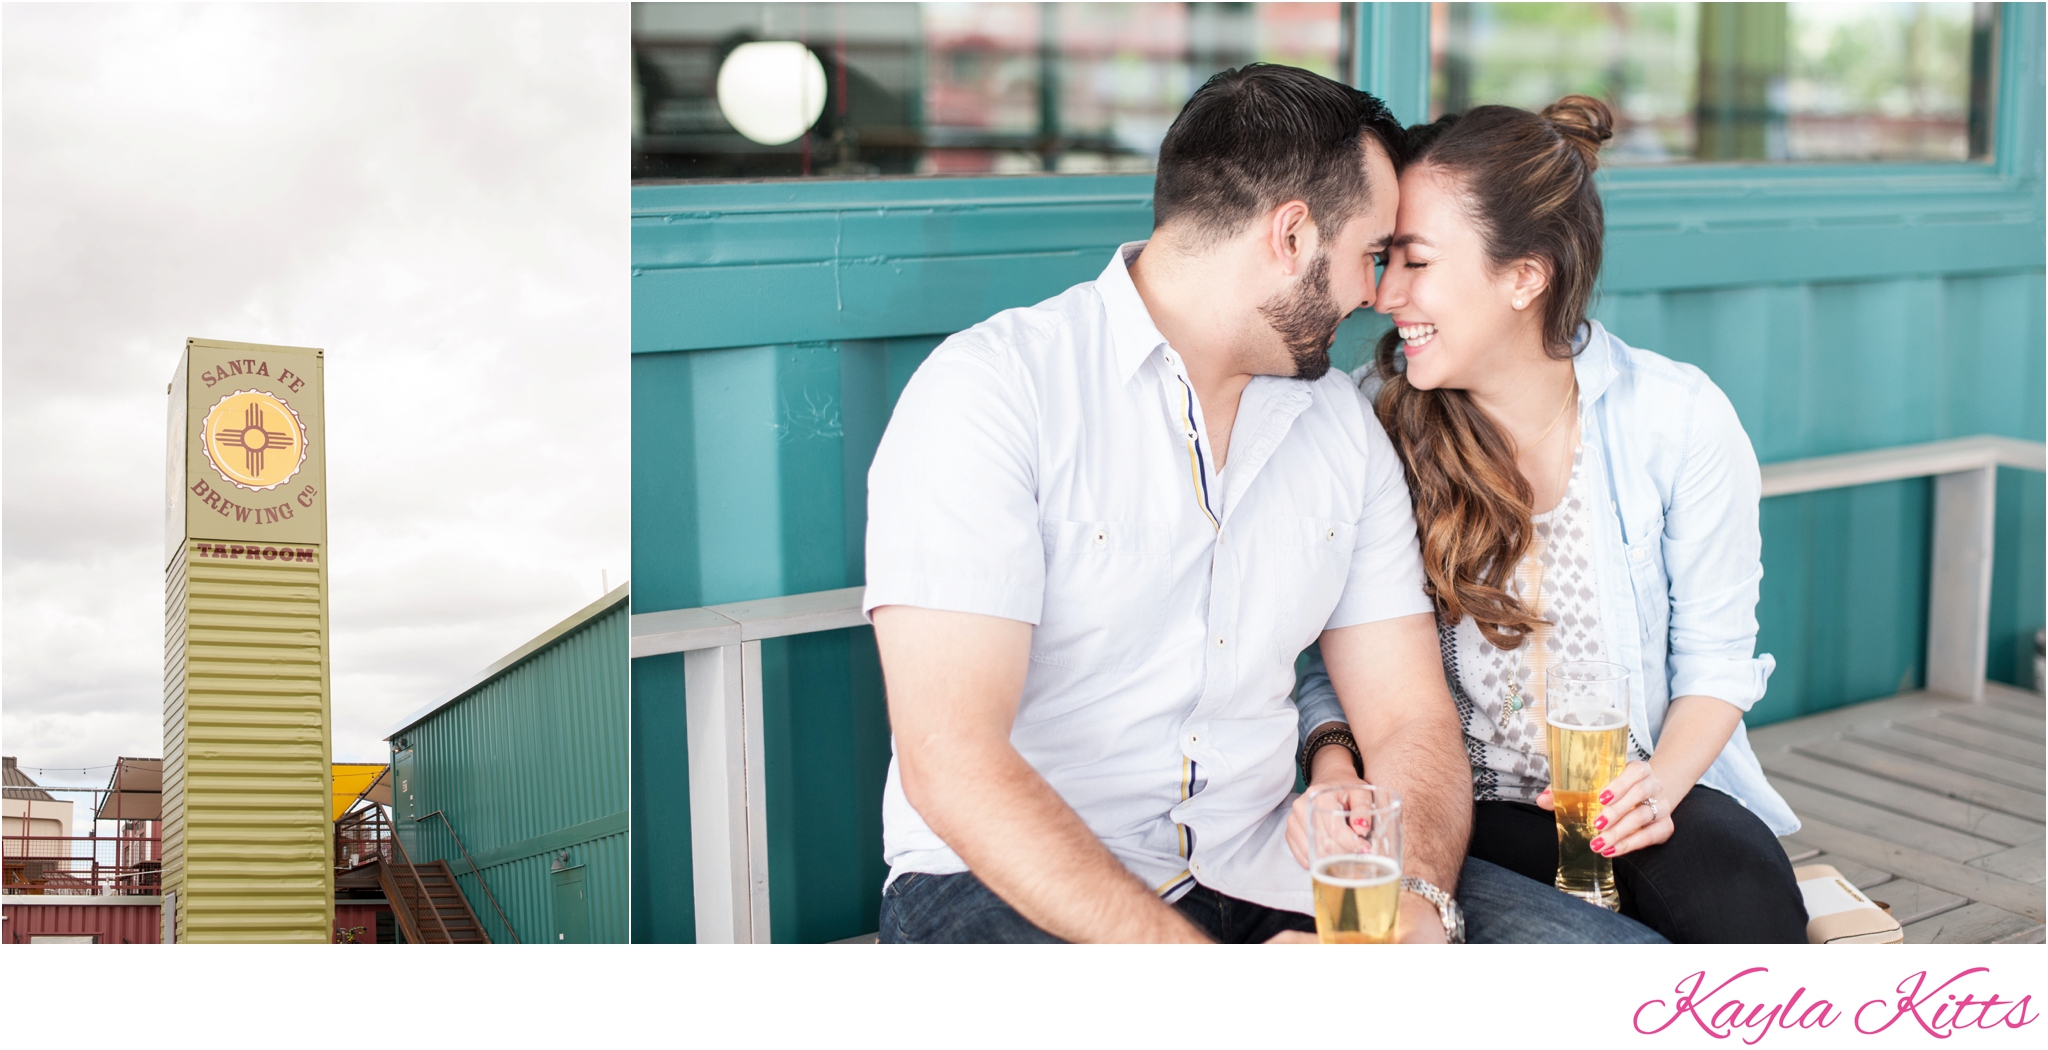 kayla kitts photography - albuquerque wedding photographer - green jeans - brewery engagement session - old town - destination wedding - cabo wedding photographer - santa fe brewery_0001.jpg